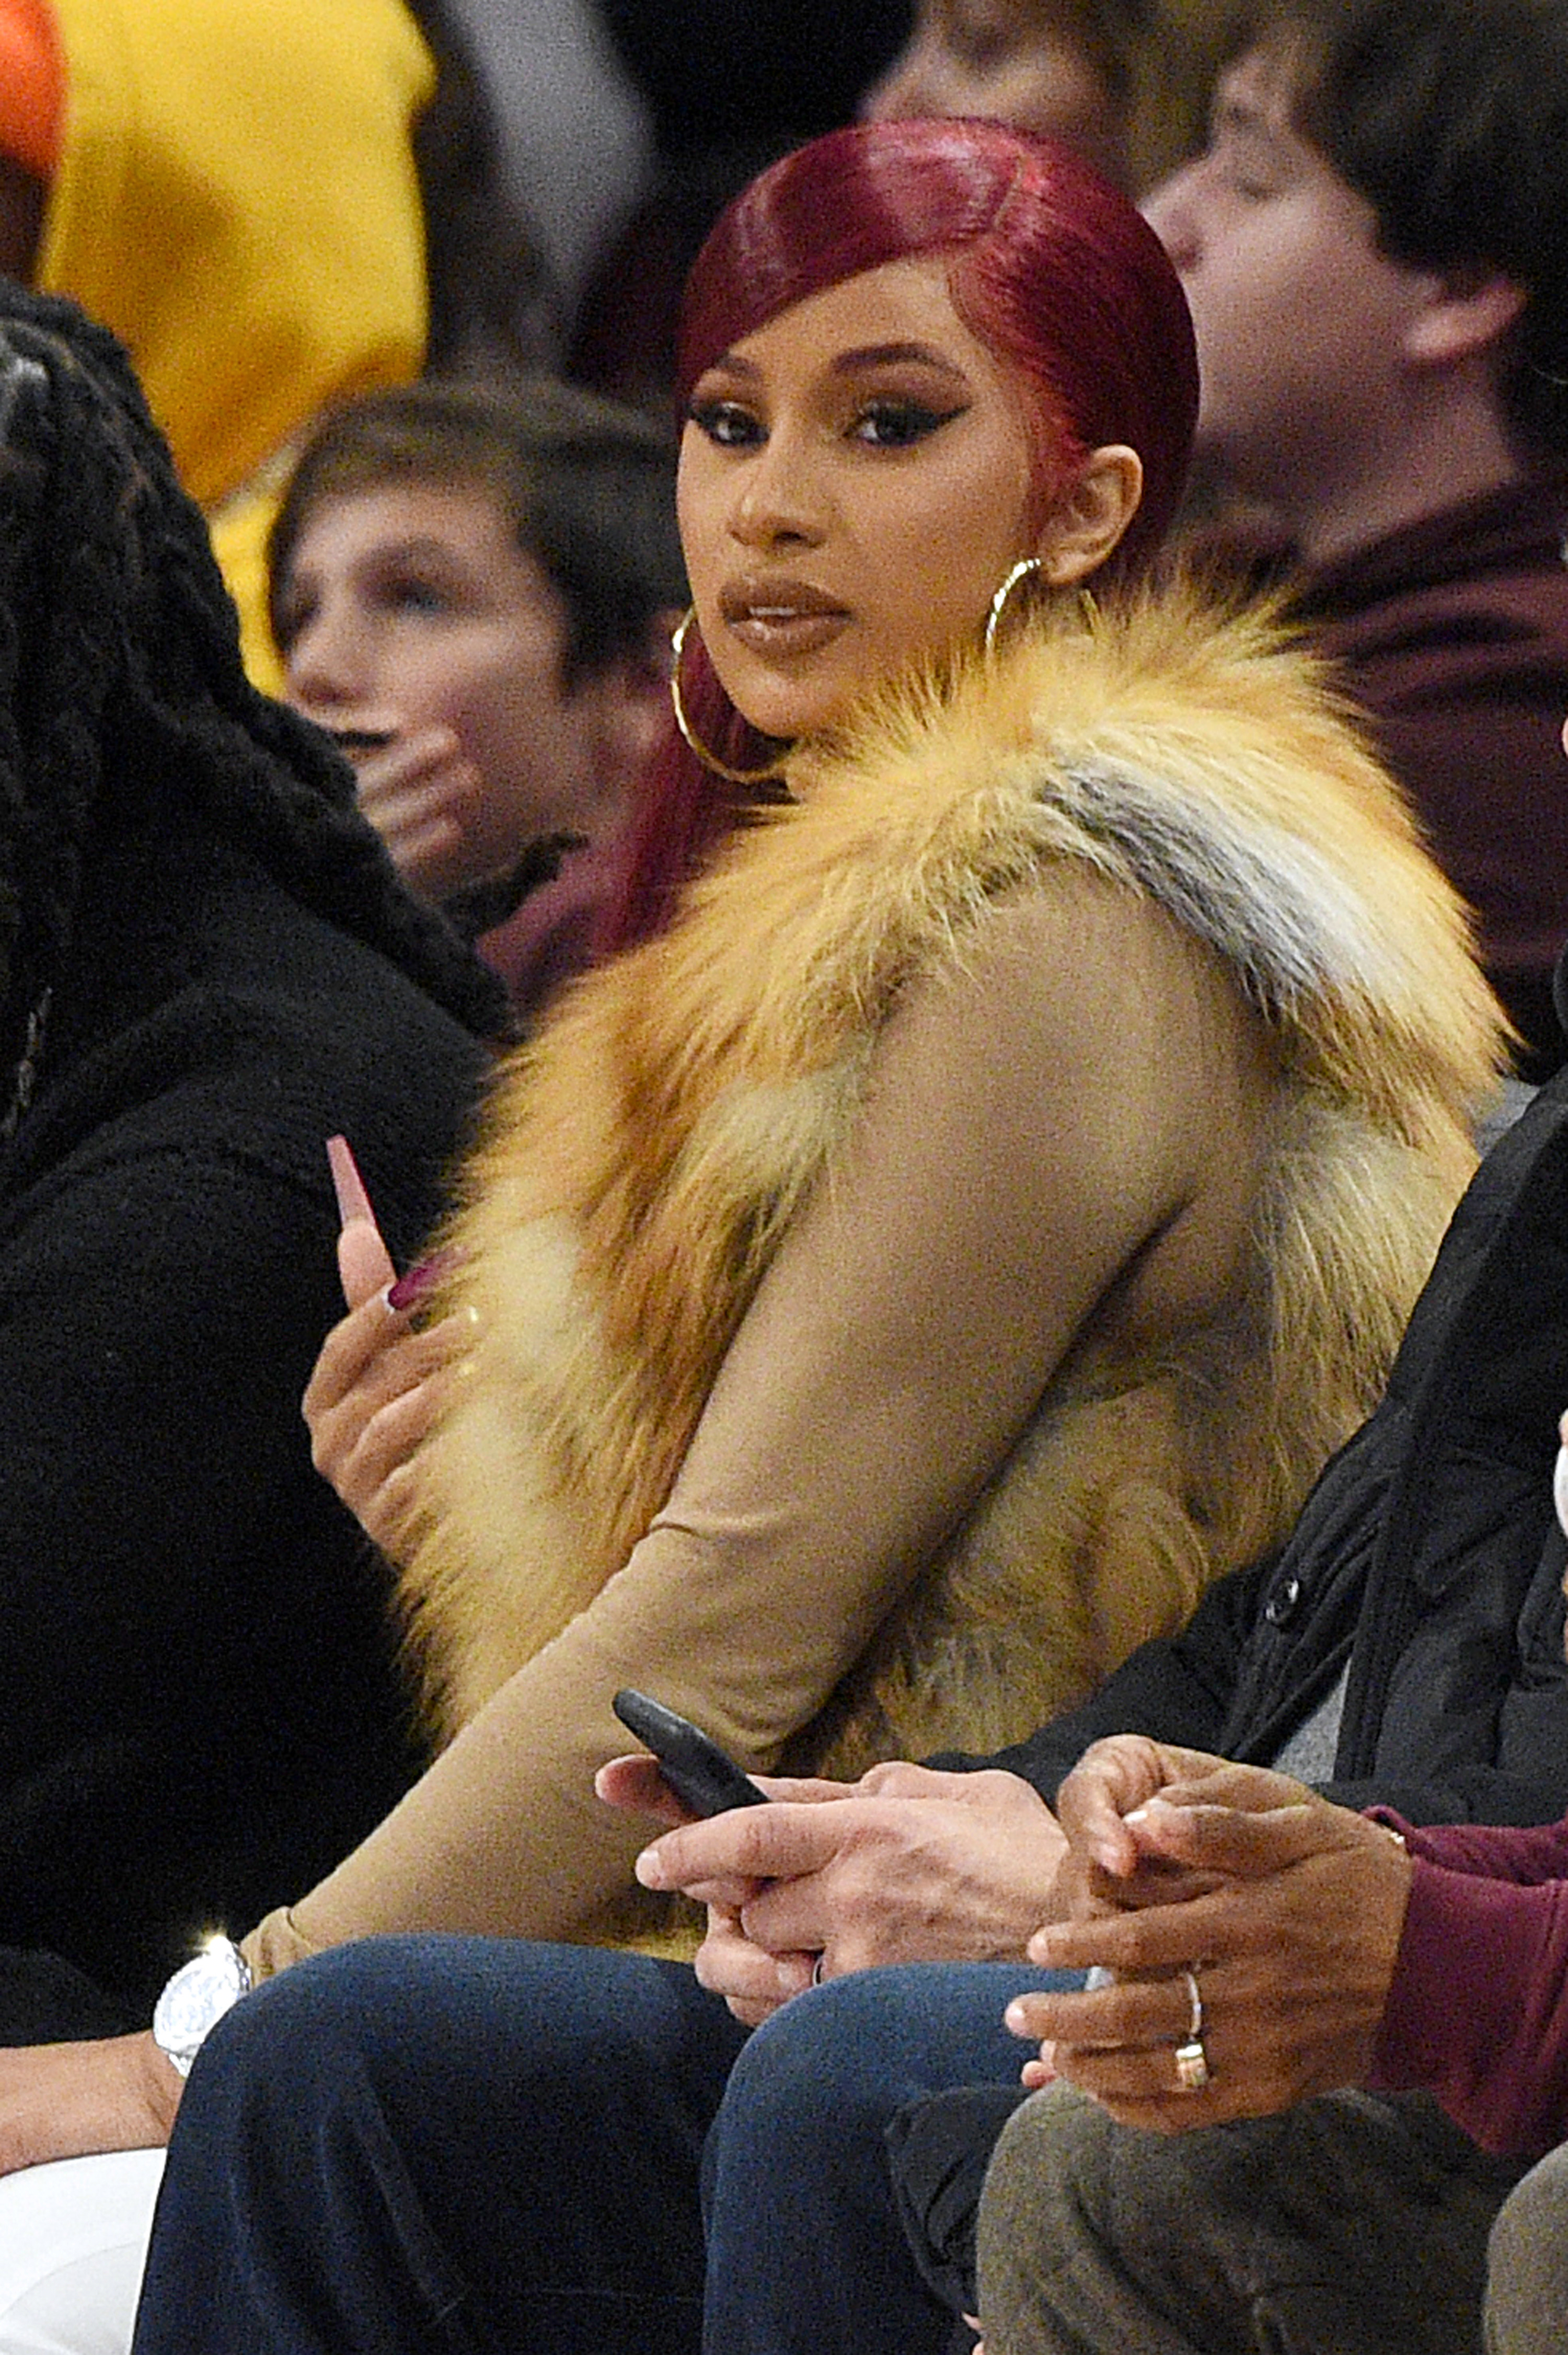 Cardi sitting court-side at a sporting event